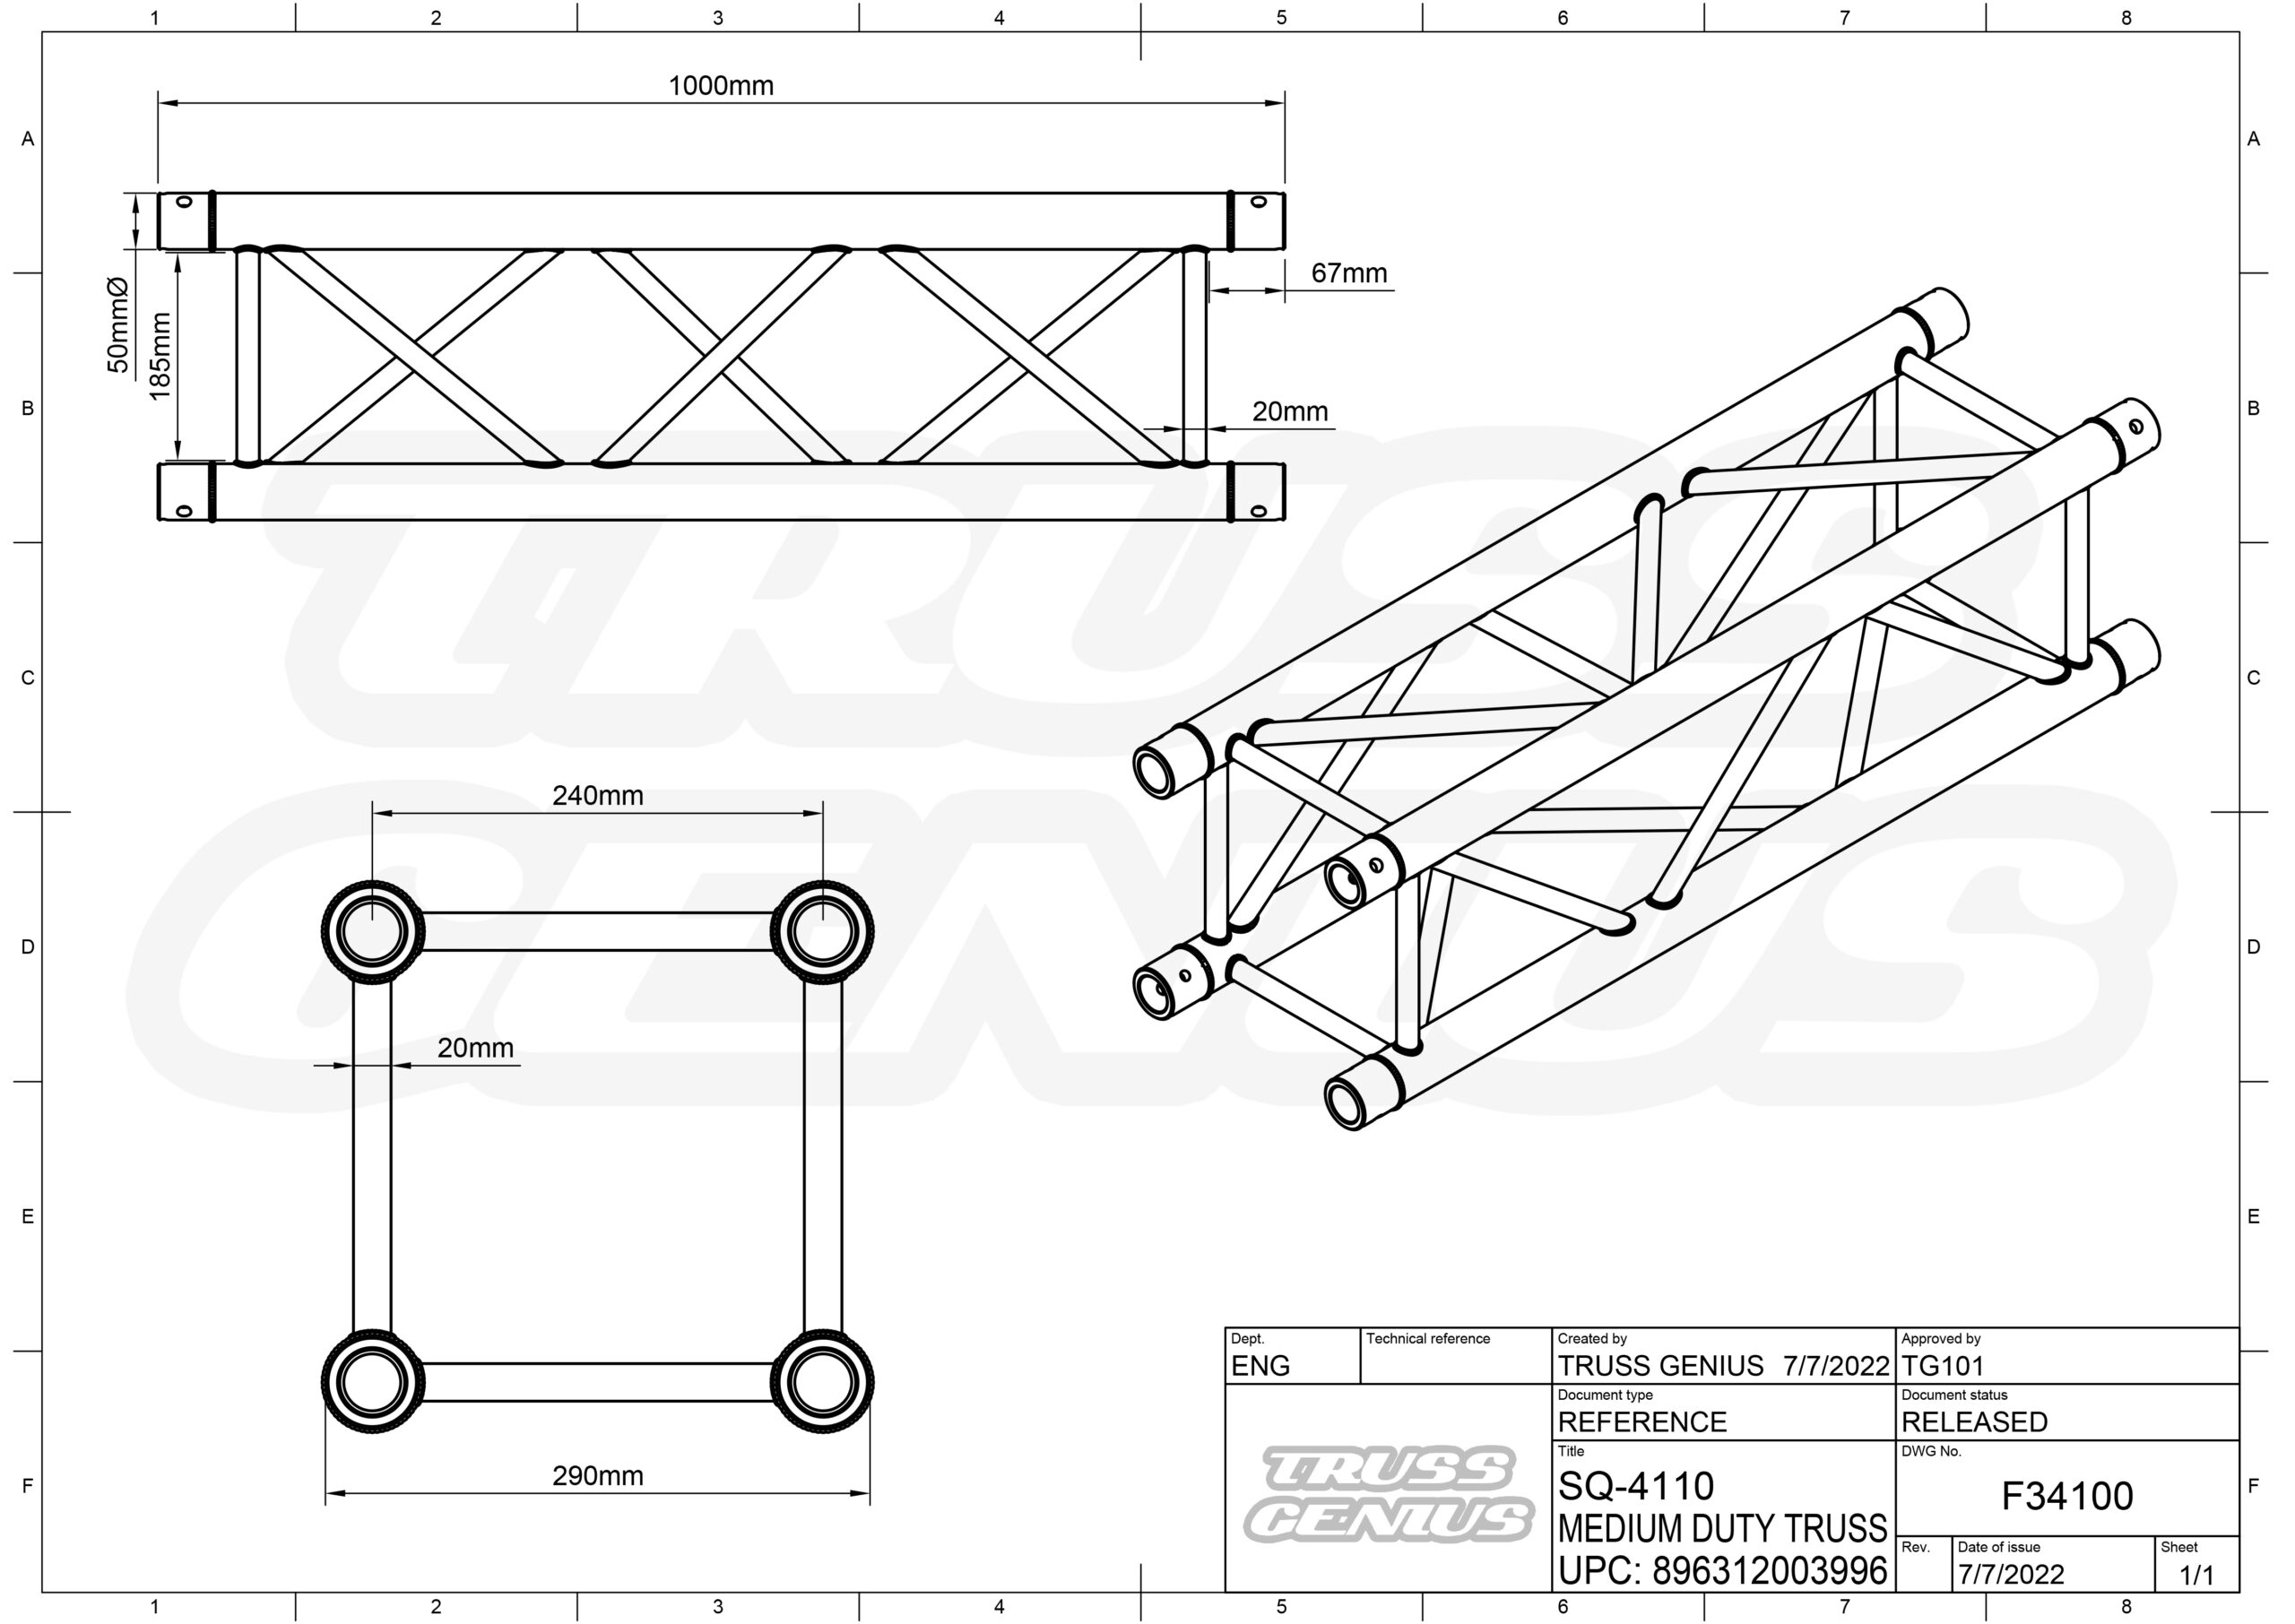 SQ-4110 Medium Duty Truss: A square aluminum trussing system from the F34 Square Truss Series designed for various applications. The truss system features a sturdy construction and can support heavy loads, with dimensions of 11.42 inches (290mm) overall width, 1.96 inches (50mm) outer diameter tubing, and an overall length of 39.36 inches (1000mm). It is designed for easy assembly and can be configured in various ways to suit specific needs. The SQ-4110 Medium Duty Truss is a reliable and versatile option for event planners, stage designers, and anyone needing a high-quality trussing system.